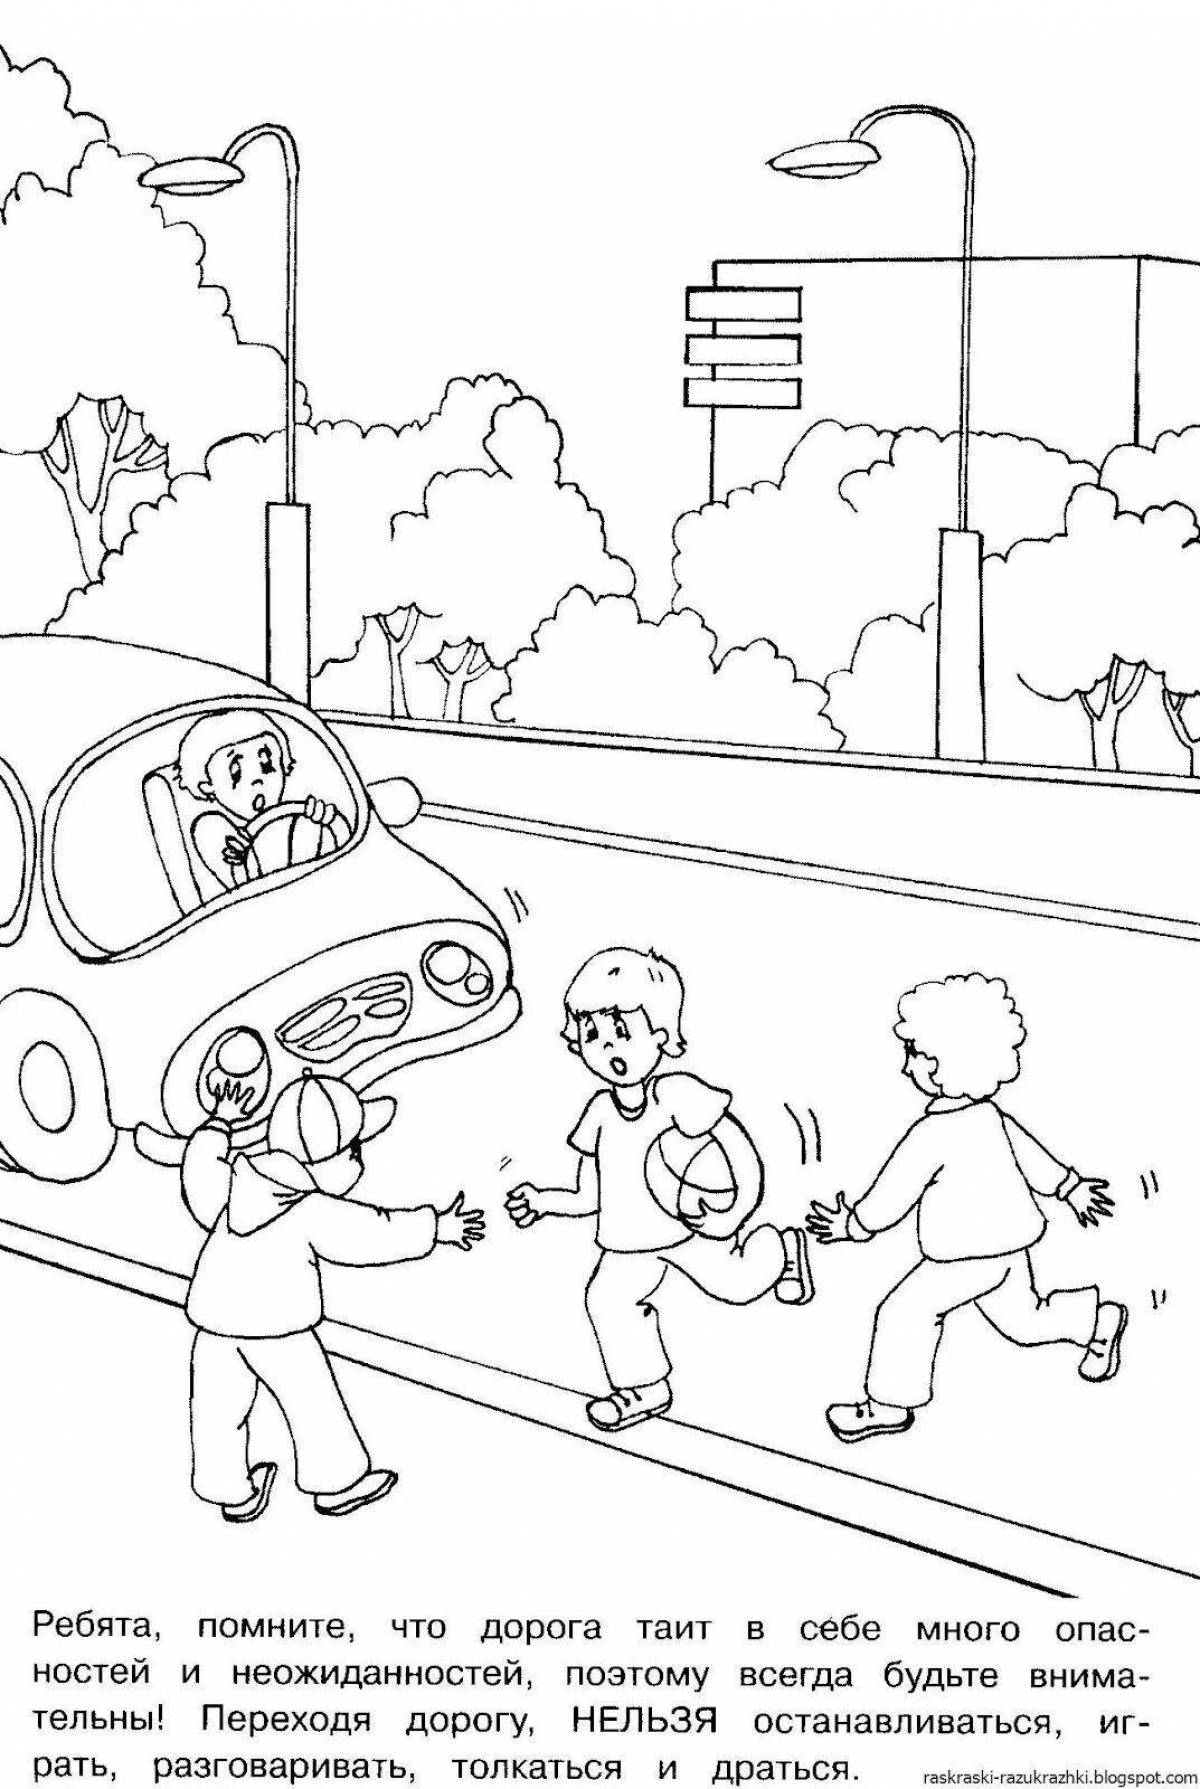 Educational safety coloring book for 6-7 year olds